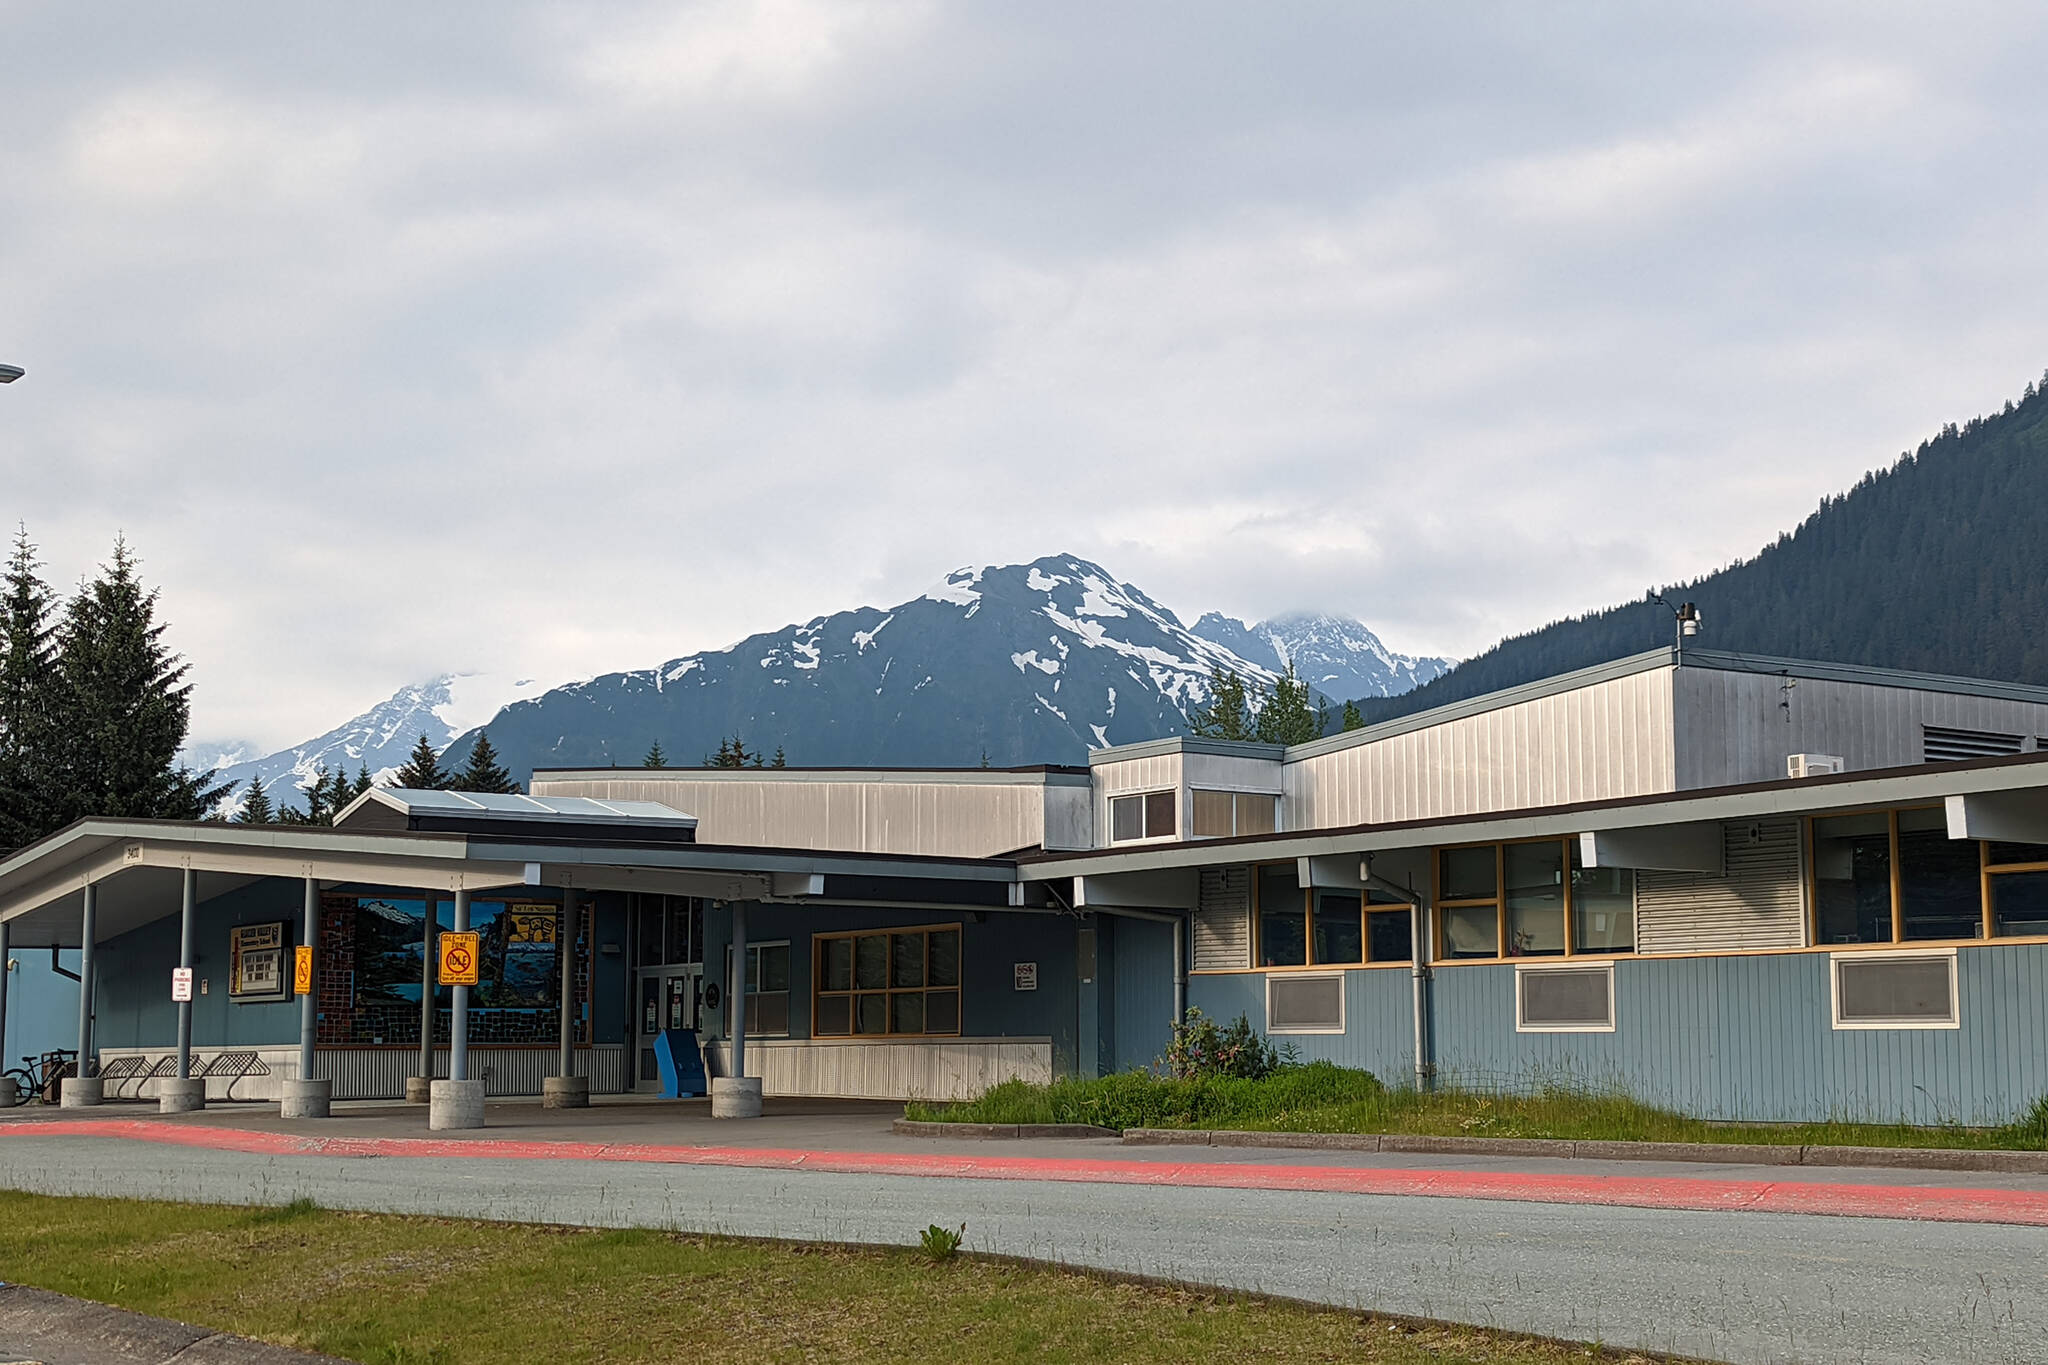 This June 14 photo shows Sít’ Eetí Shaanáx – Glacier Valley Elementary School. School district officials are considering procuring a third-party investigator to look into how a dozen children and two adults were served floor sealant instead of milk during a summer youth program. (Ben Hohenstatt / Juneau Empire)